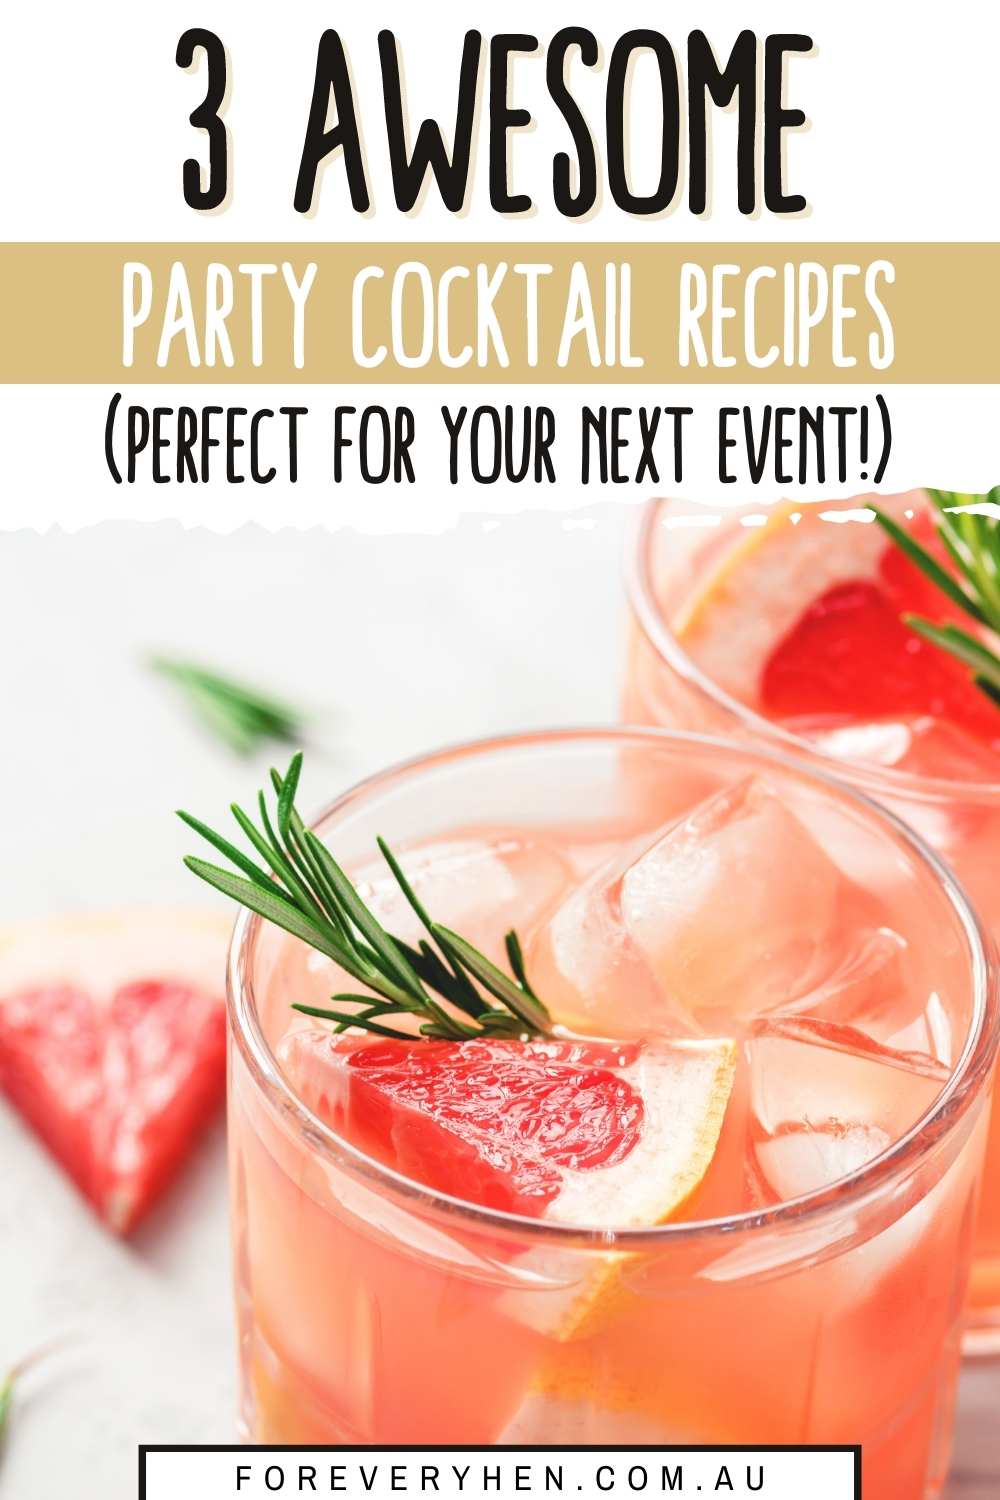 Party Cocktail Recipes